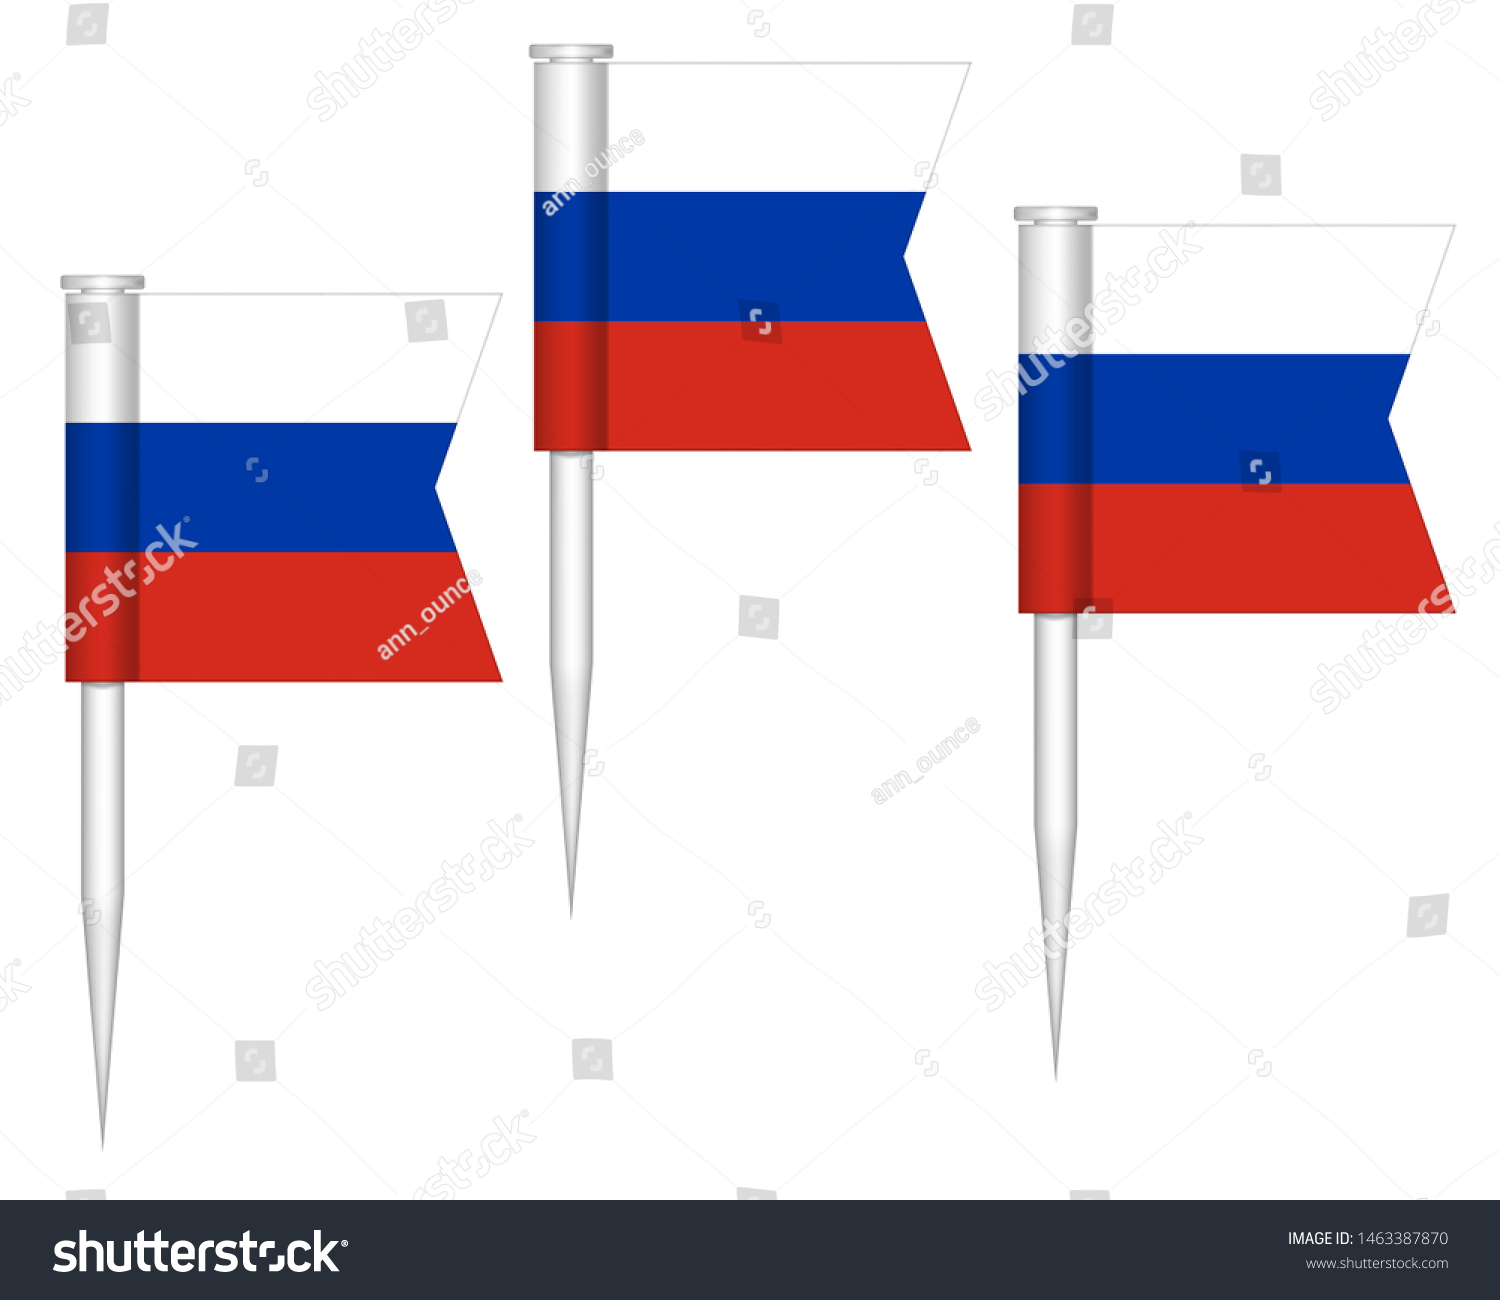 SVG of Russian flag push pins, vector illustration. Mini stick small pushpin flags of Russia isolated on white background. svg